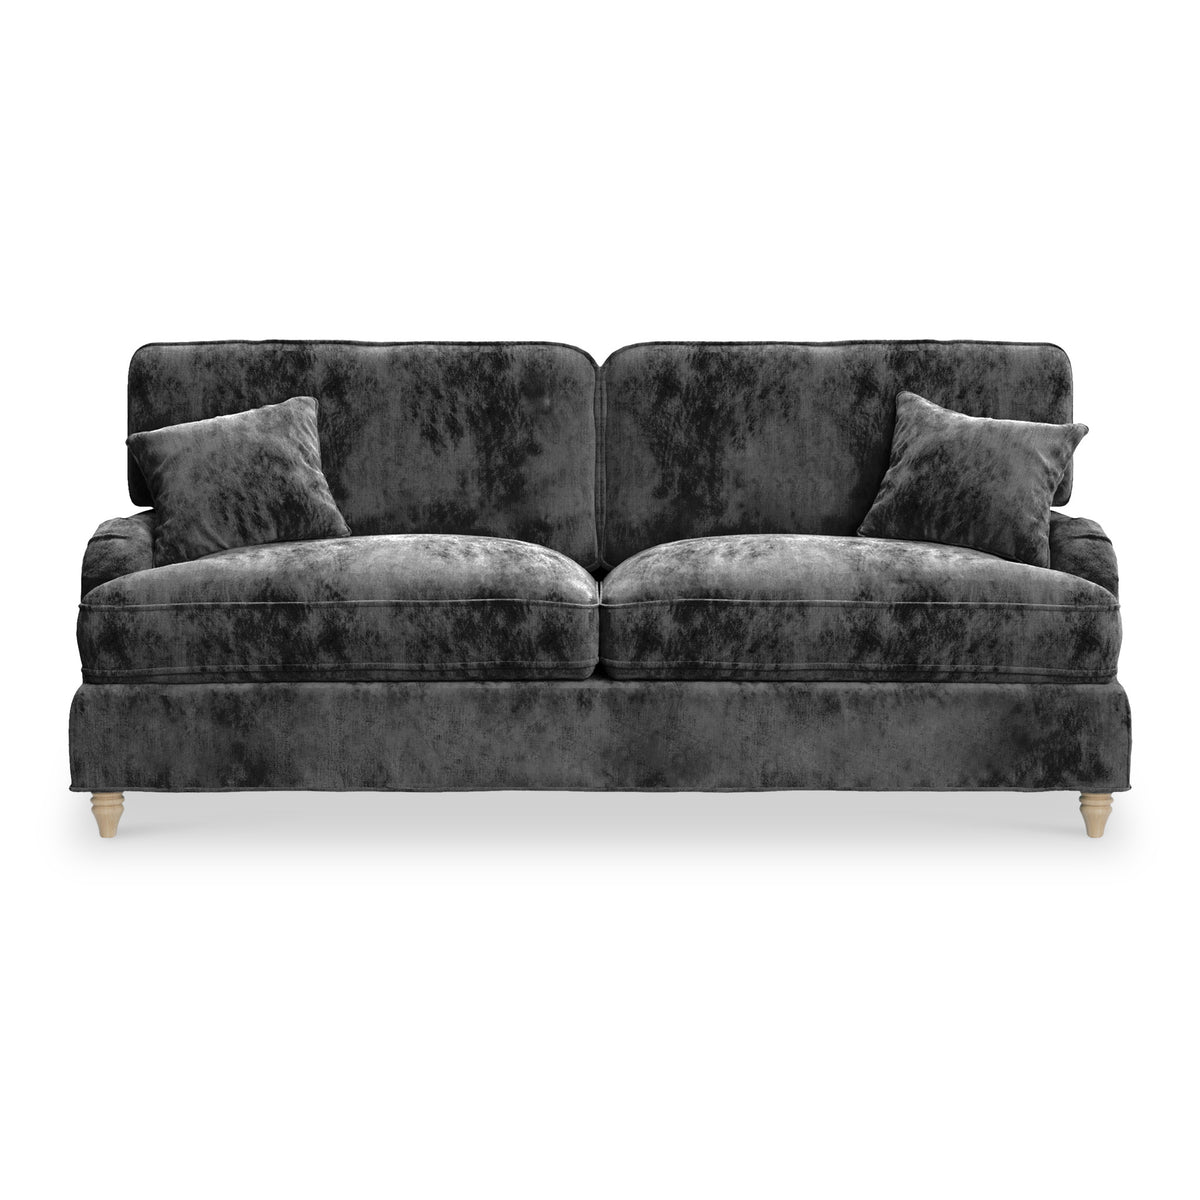 Arthur Charcoal 4 Seater Sofa from Roseland Furniture